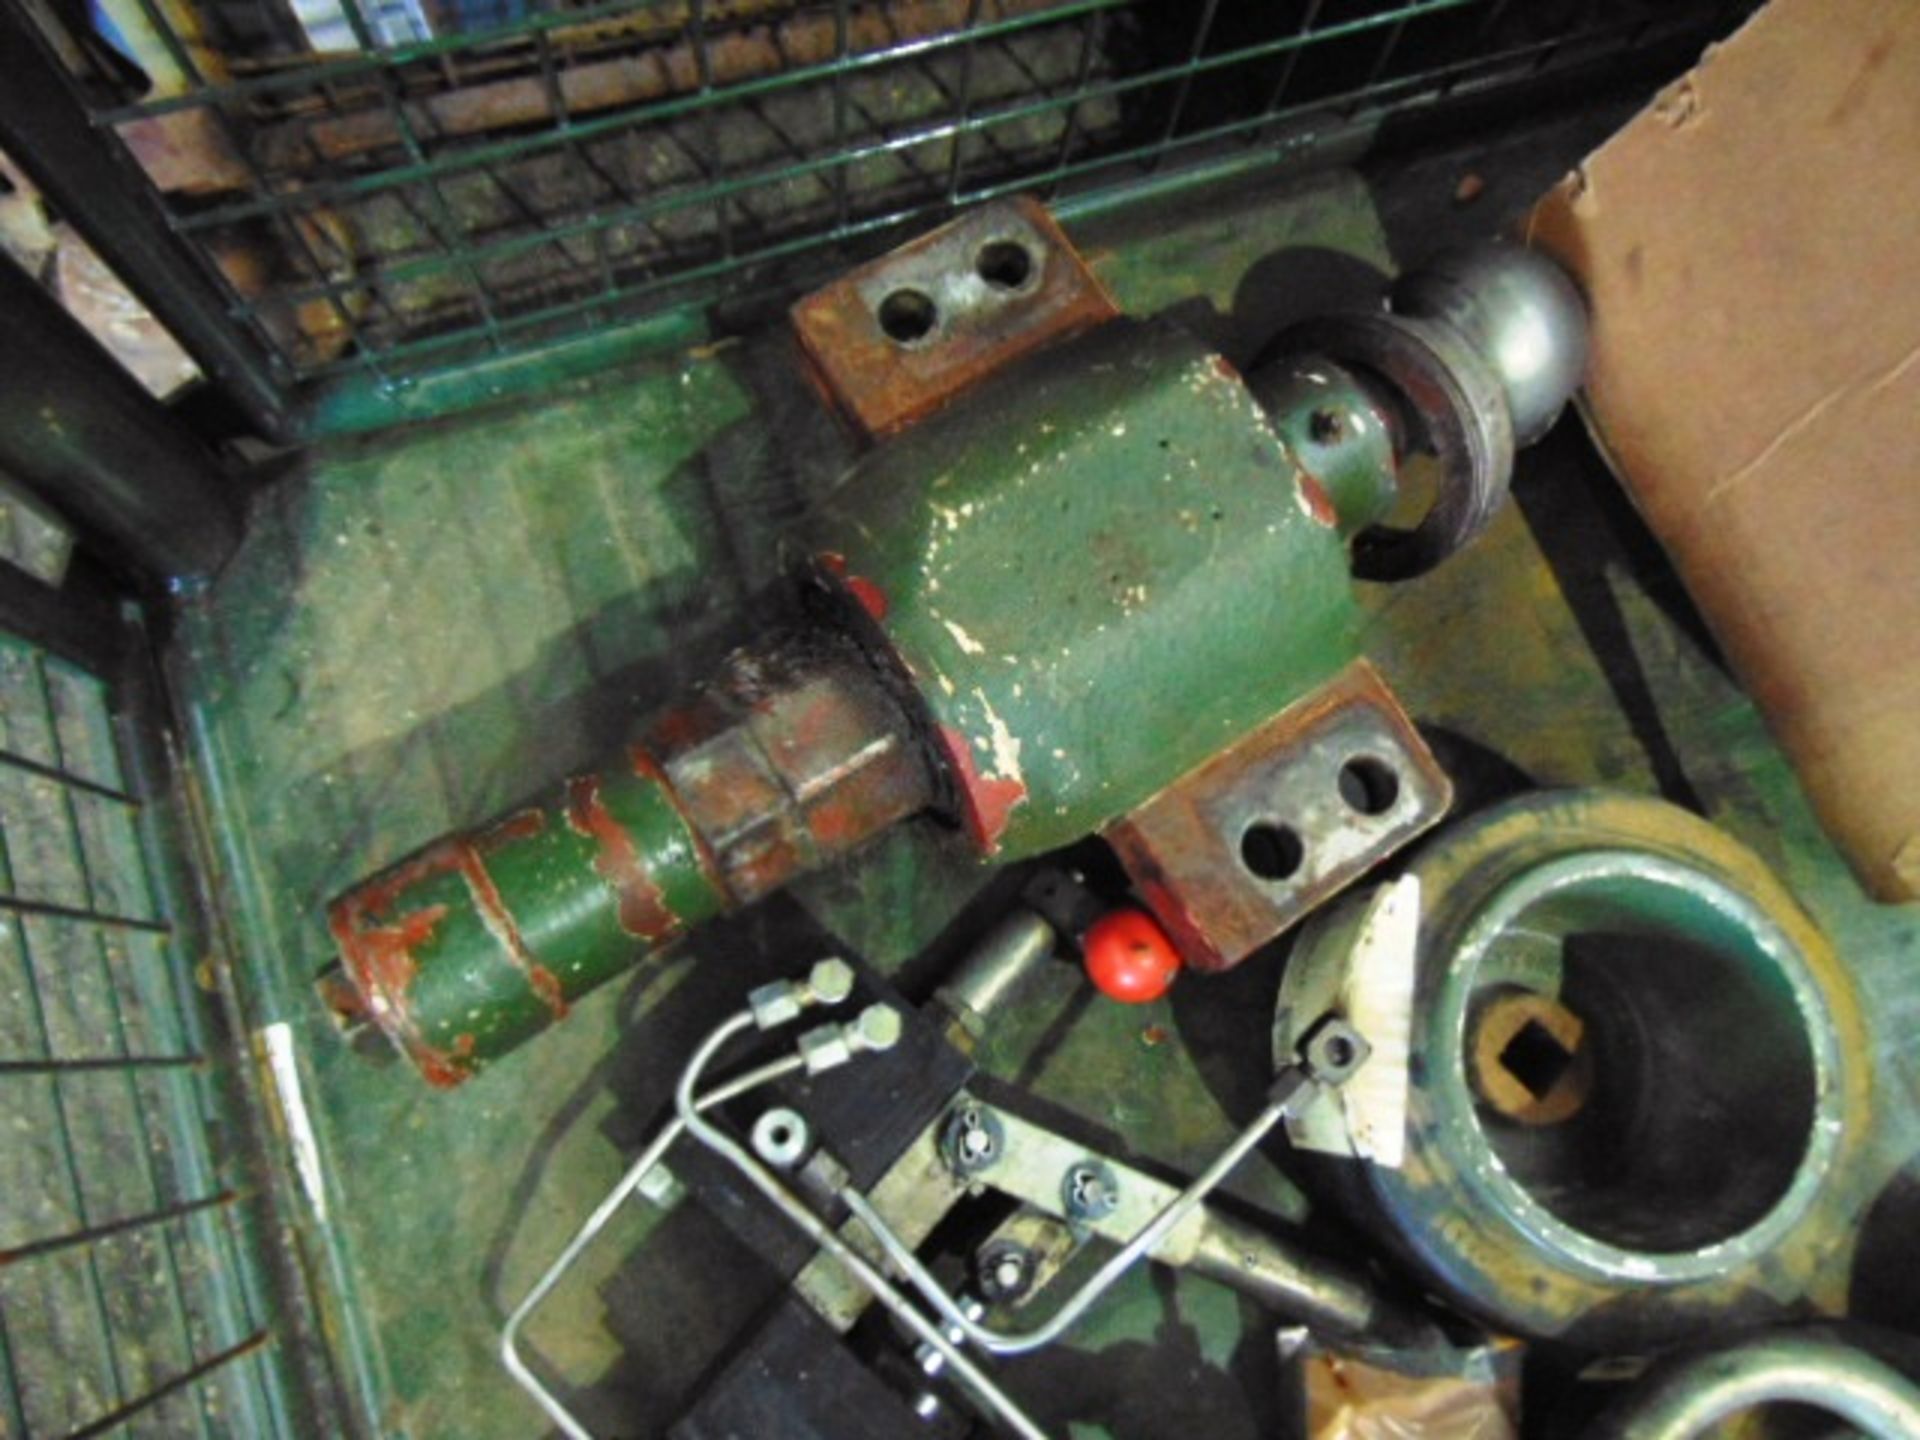 Mixed Stillage of CVRT, Warrior and FV Parts consisting of Wheels, Pumps, Shock Absorbers etc - Image 4 of 7